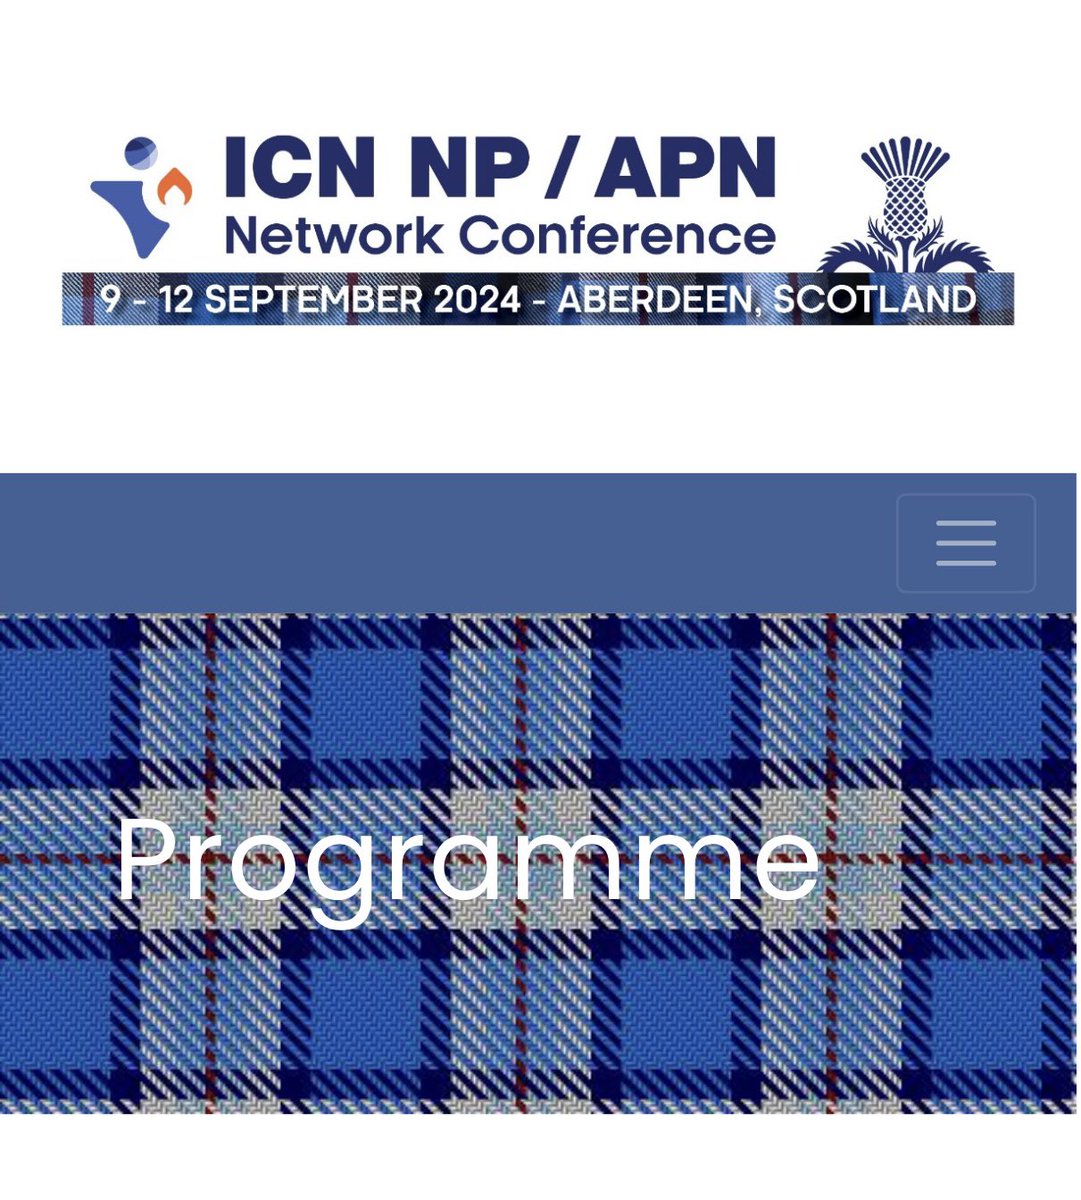 Delighted to be giving a clinical workshop on PoCUS @ICNGlobalAPN 🏴󠁧󠁢󠁳󠁣󠁴󠁿 The programme looks fantastic! Register today - you do not want to miss this! 🔗 tinyurl.com/2f4y3krj #advancedpractice #international